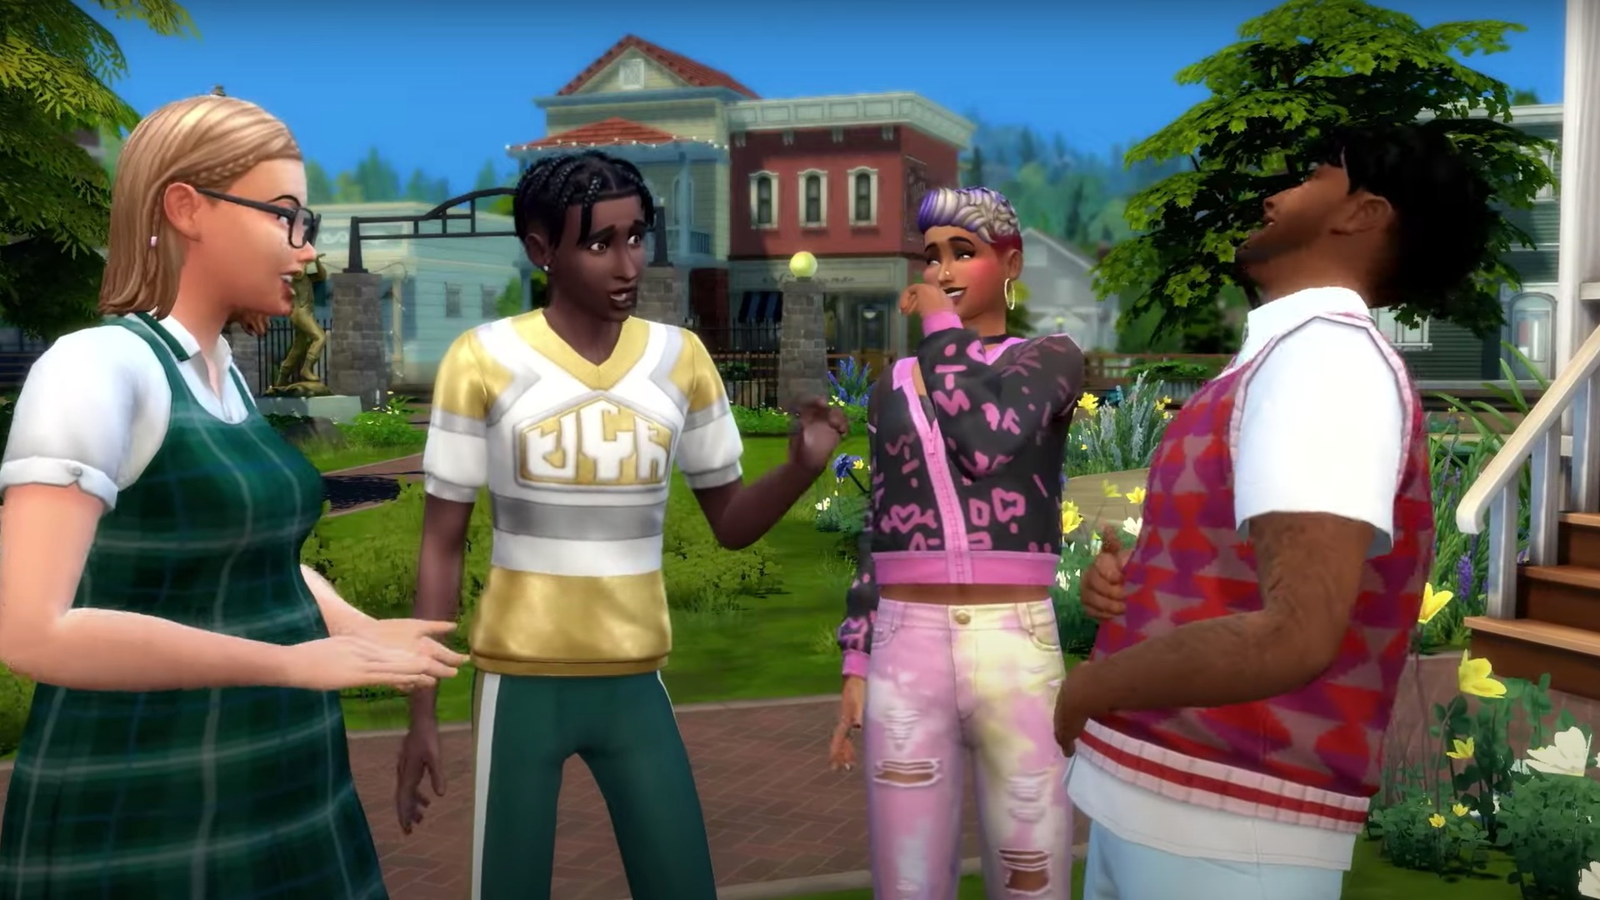 Here's How You Can Play The Sims 4 for Free on PC, Xbox, and PlayStation